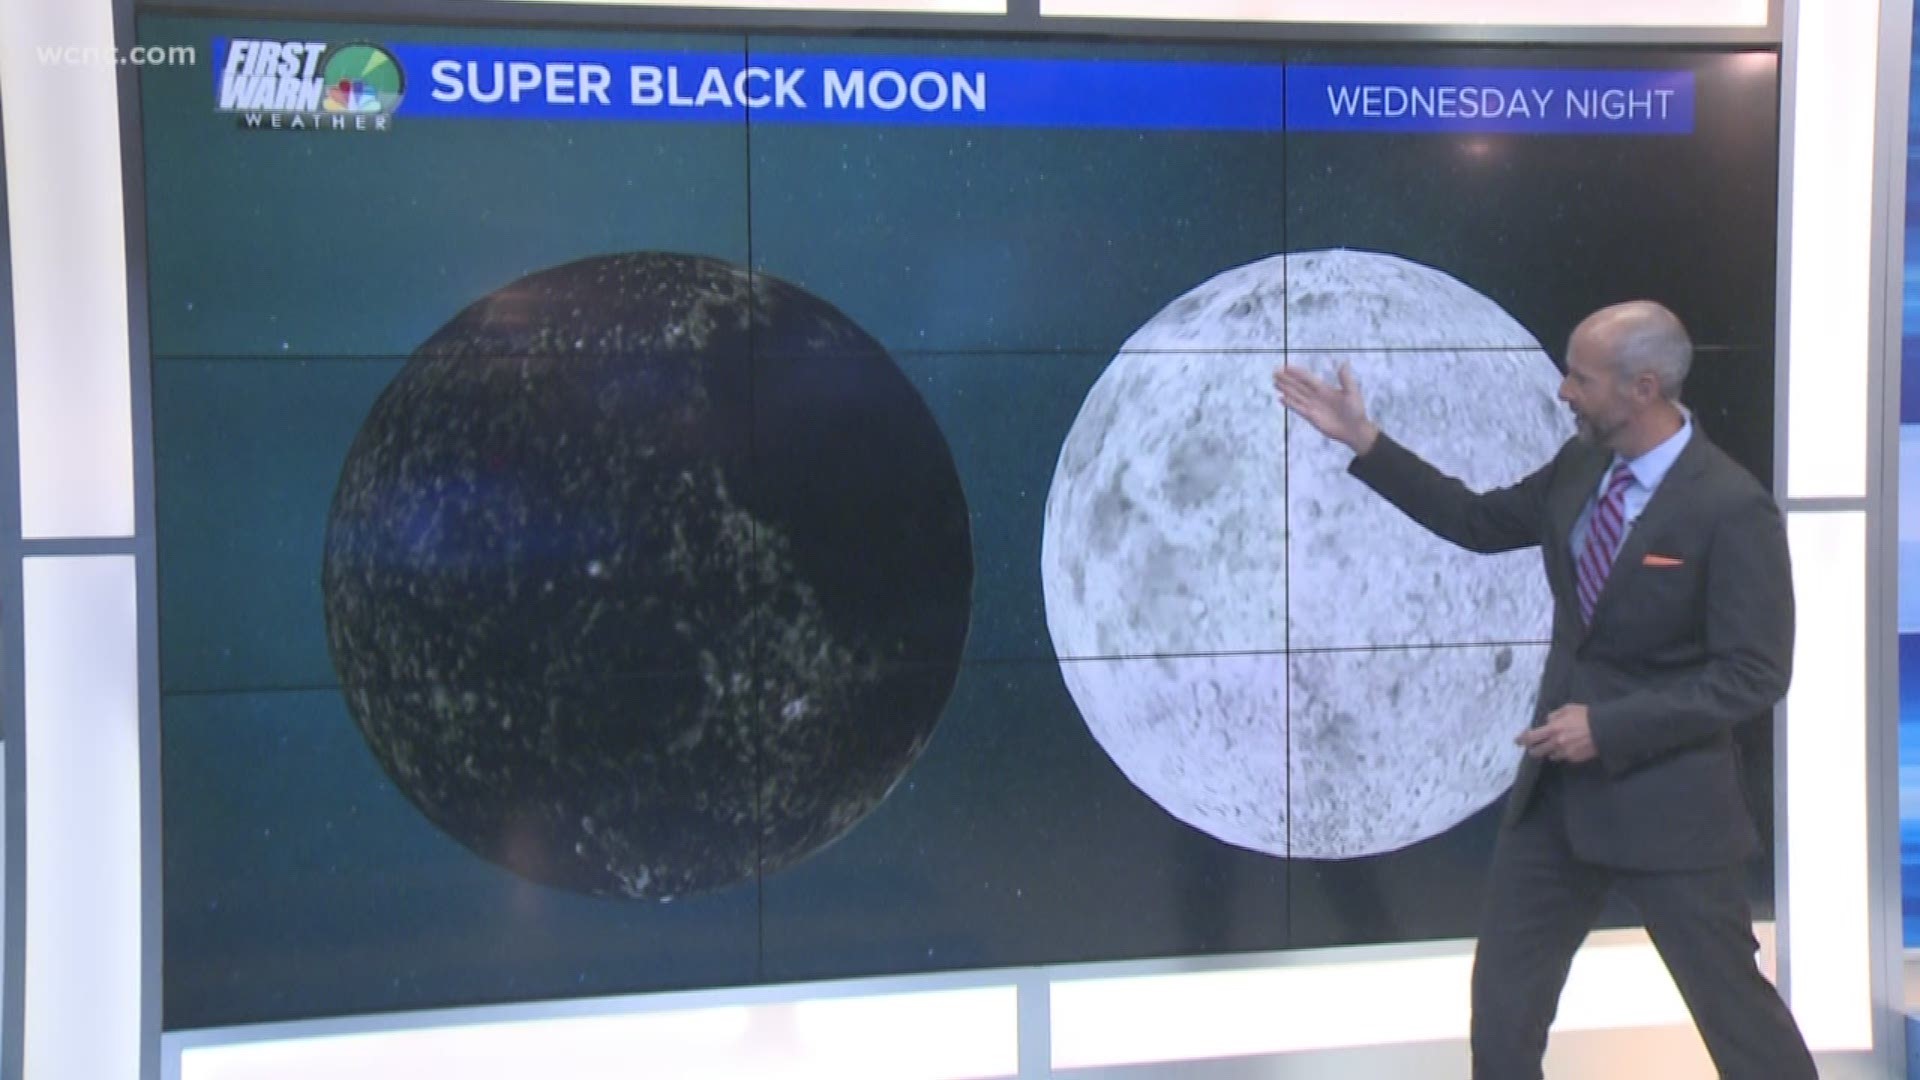 Brad Panovich explains what a black moon is, and how it's different from a blue moon.